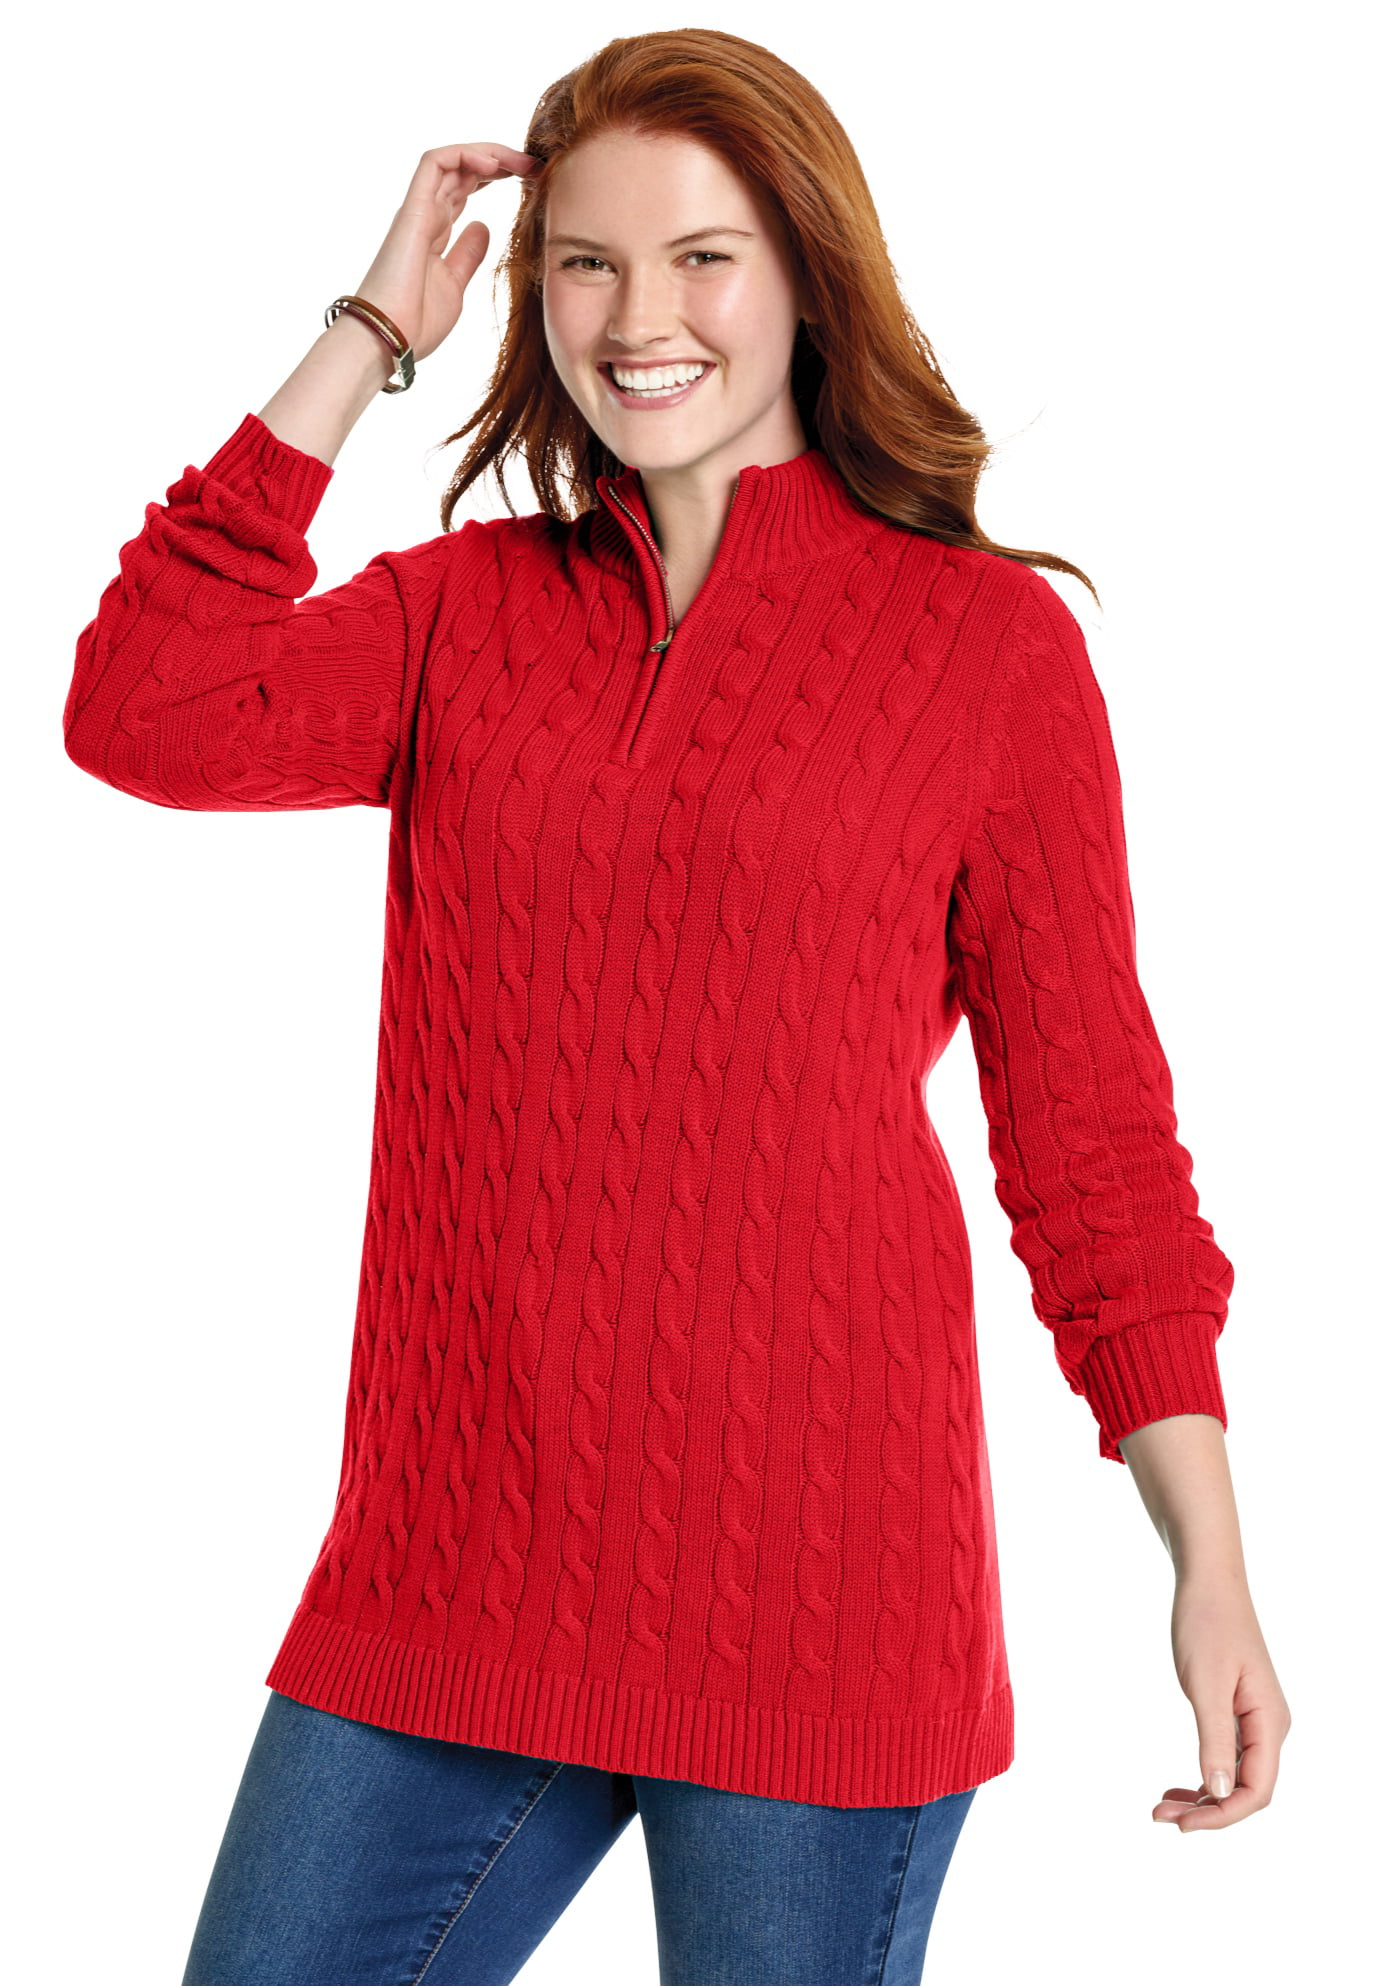 Woman Within - Woman Within Women's Plus Size Cable Knit Half-Zip ...